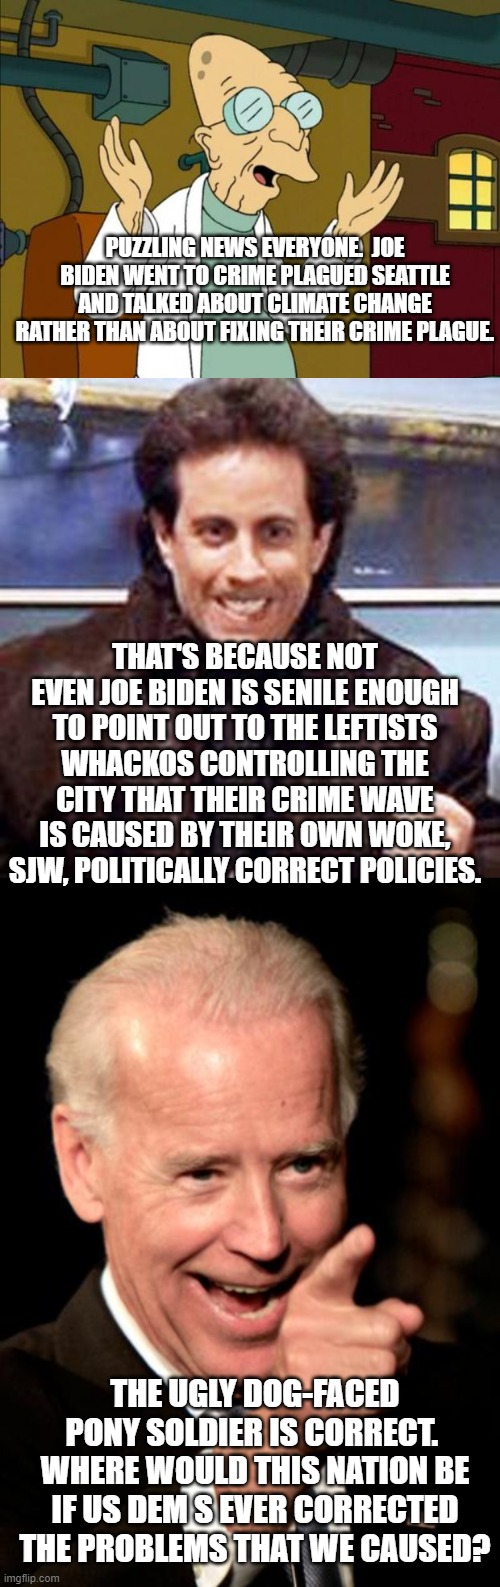 Gotta admit that they are all making good points. | PUZZLING NEWS EVERYONE.  JOE BIDEN WENT TO CRIME PLAGUED SEATTLE AND TALKED ABOUT CLIMATE CHANGE RATHER THAN ABOUT FIXING THEIR CRIME PLAGUE. THAT'S BECAUSE NOT EVEN JOE BIDEN IS SENILE ENOUGH TO POINT OUT TO THE LEFTISTS WHACKOS CONTROLLING THE CITY THAT THEIR CRIME WAVE IS CAUSED BY THEIR OWN WOKE, SJW, POLITICALLY CORRECT POLICIES. THE UGLY DOG-FACED PONY SOLDIER IS CORRECT.  WHERE WOULD THIS NATION BE IF US DEM S EVER CORRECTED THE PROBLEMS THAT WE CAUSED? | image tagged in professor farnsworth good news everyone | made w/ Imgflip meme maker